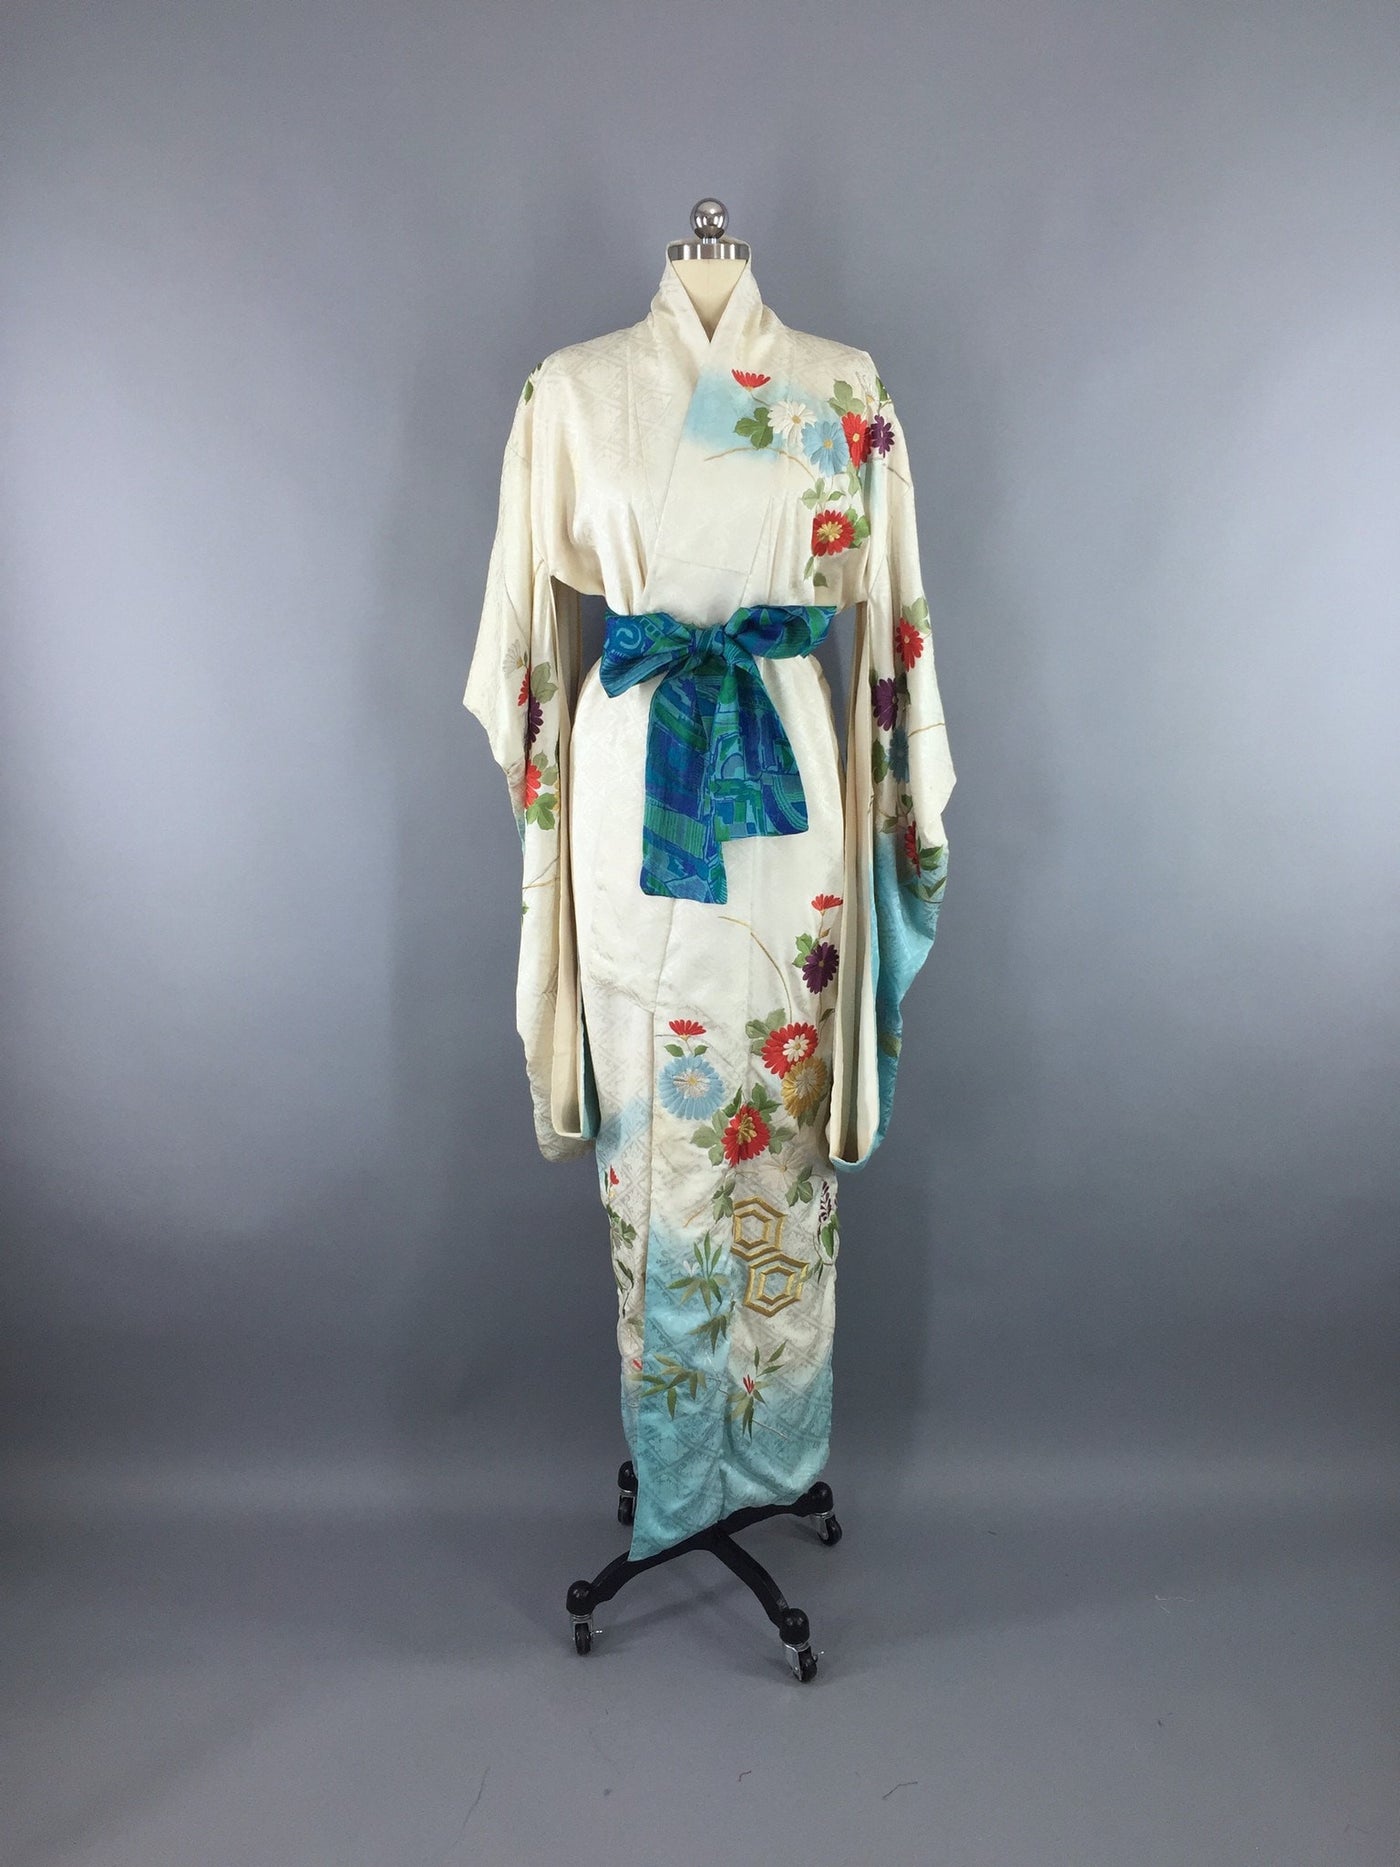 Vintage 1950s Silk Kimono Robe Furisode with Blue Floral Embroidery - ThisBlueBird